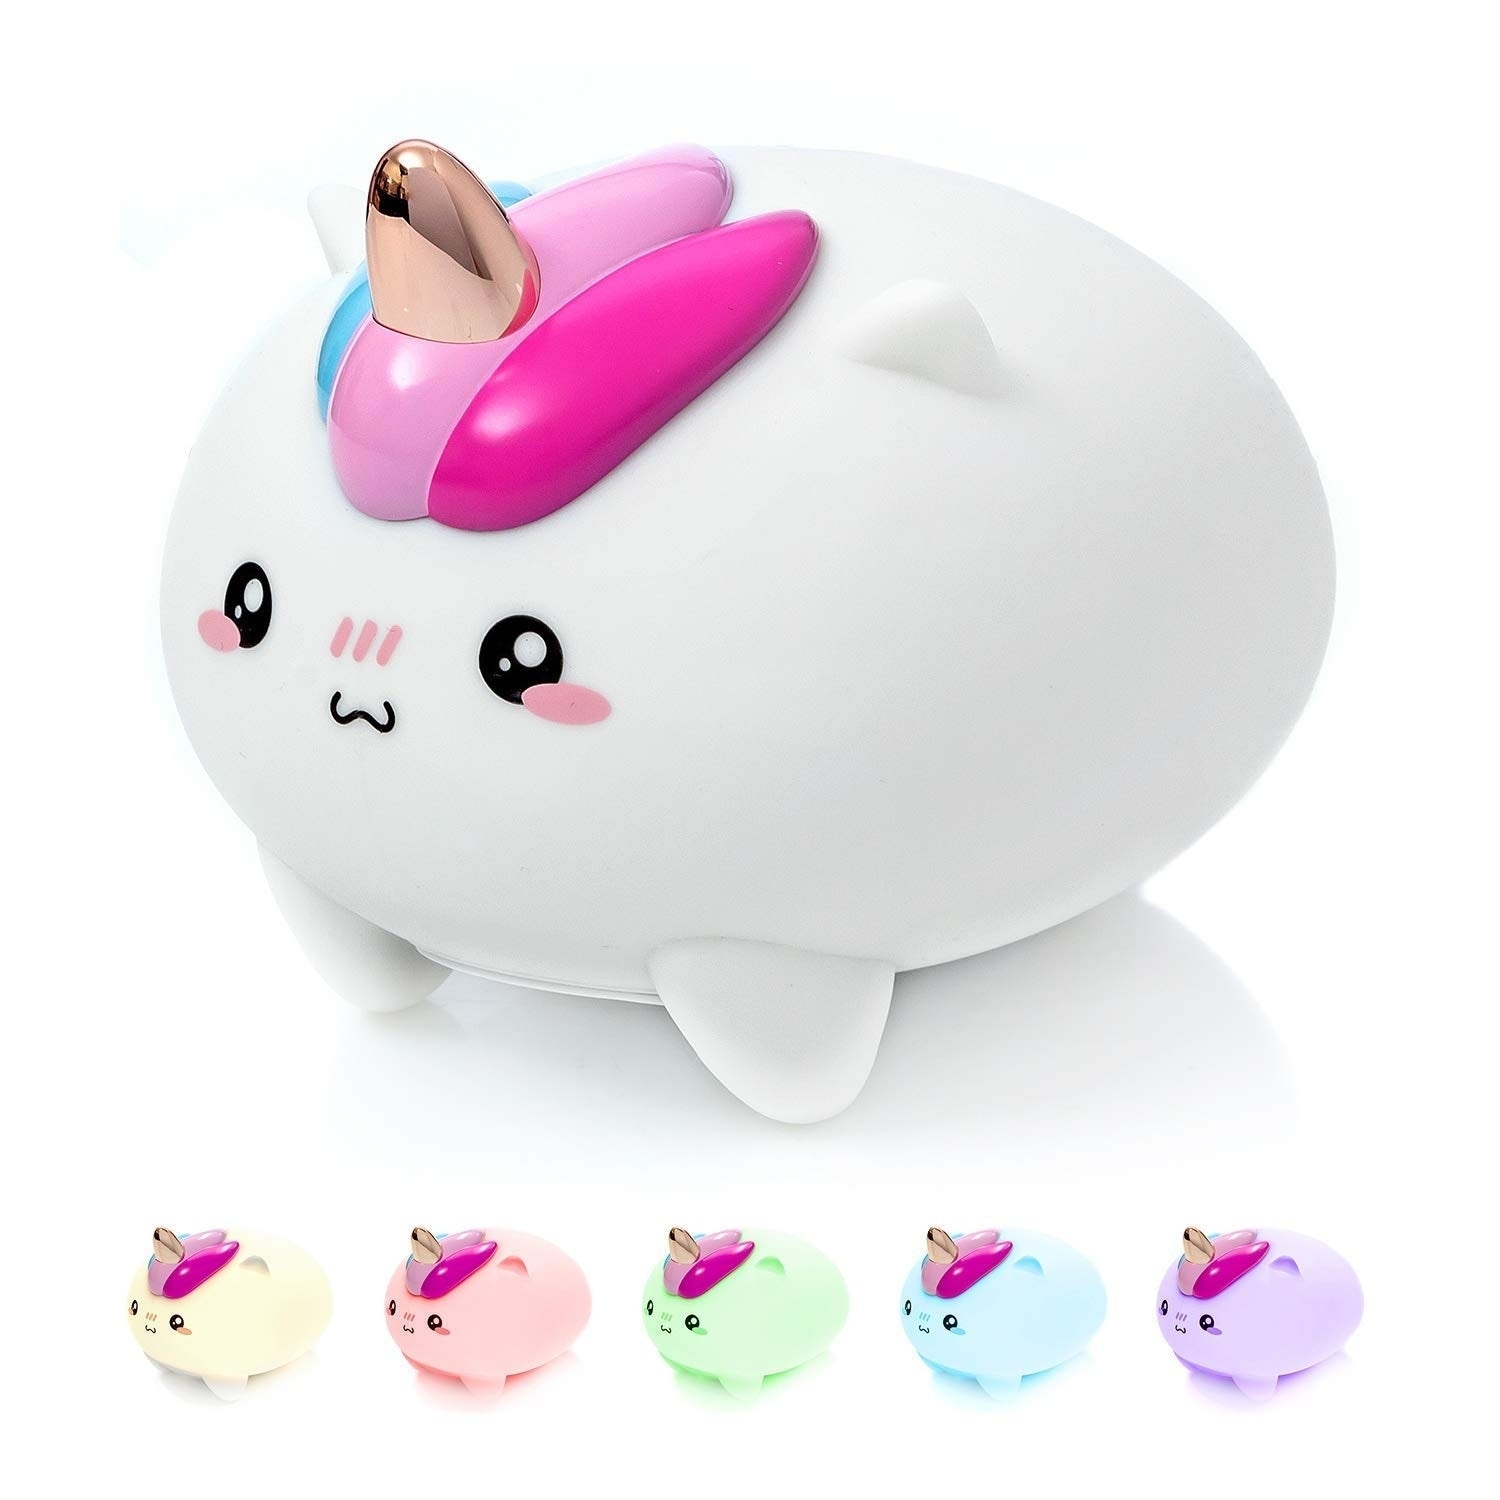 AA Batteries Brand New Details about   Kids Rainbow Dreams Unicorn Night Light Color Changing 